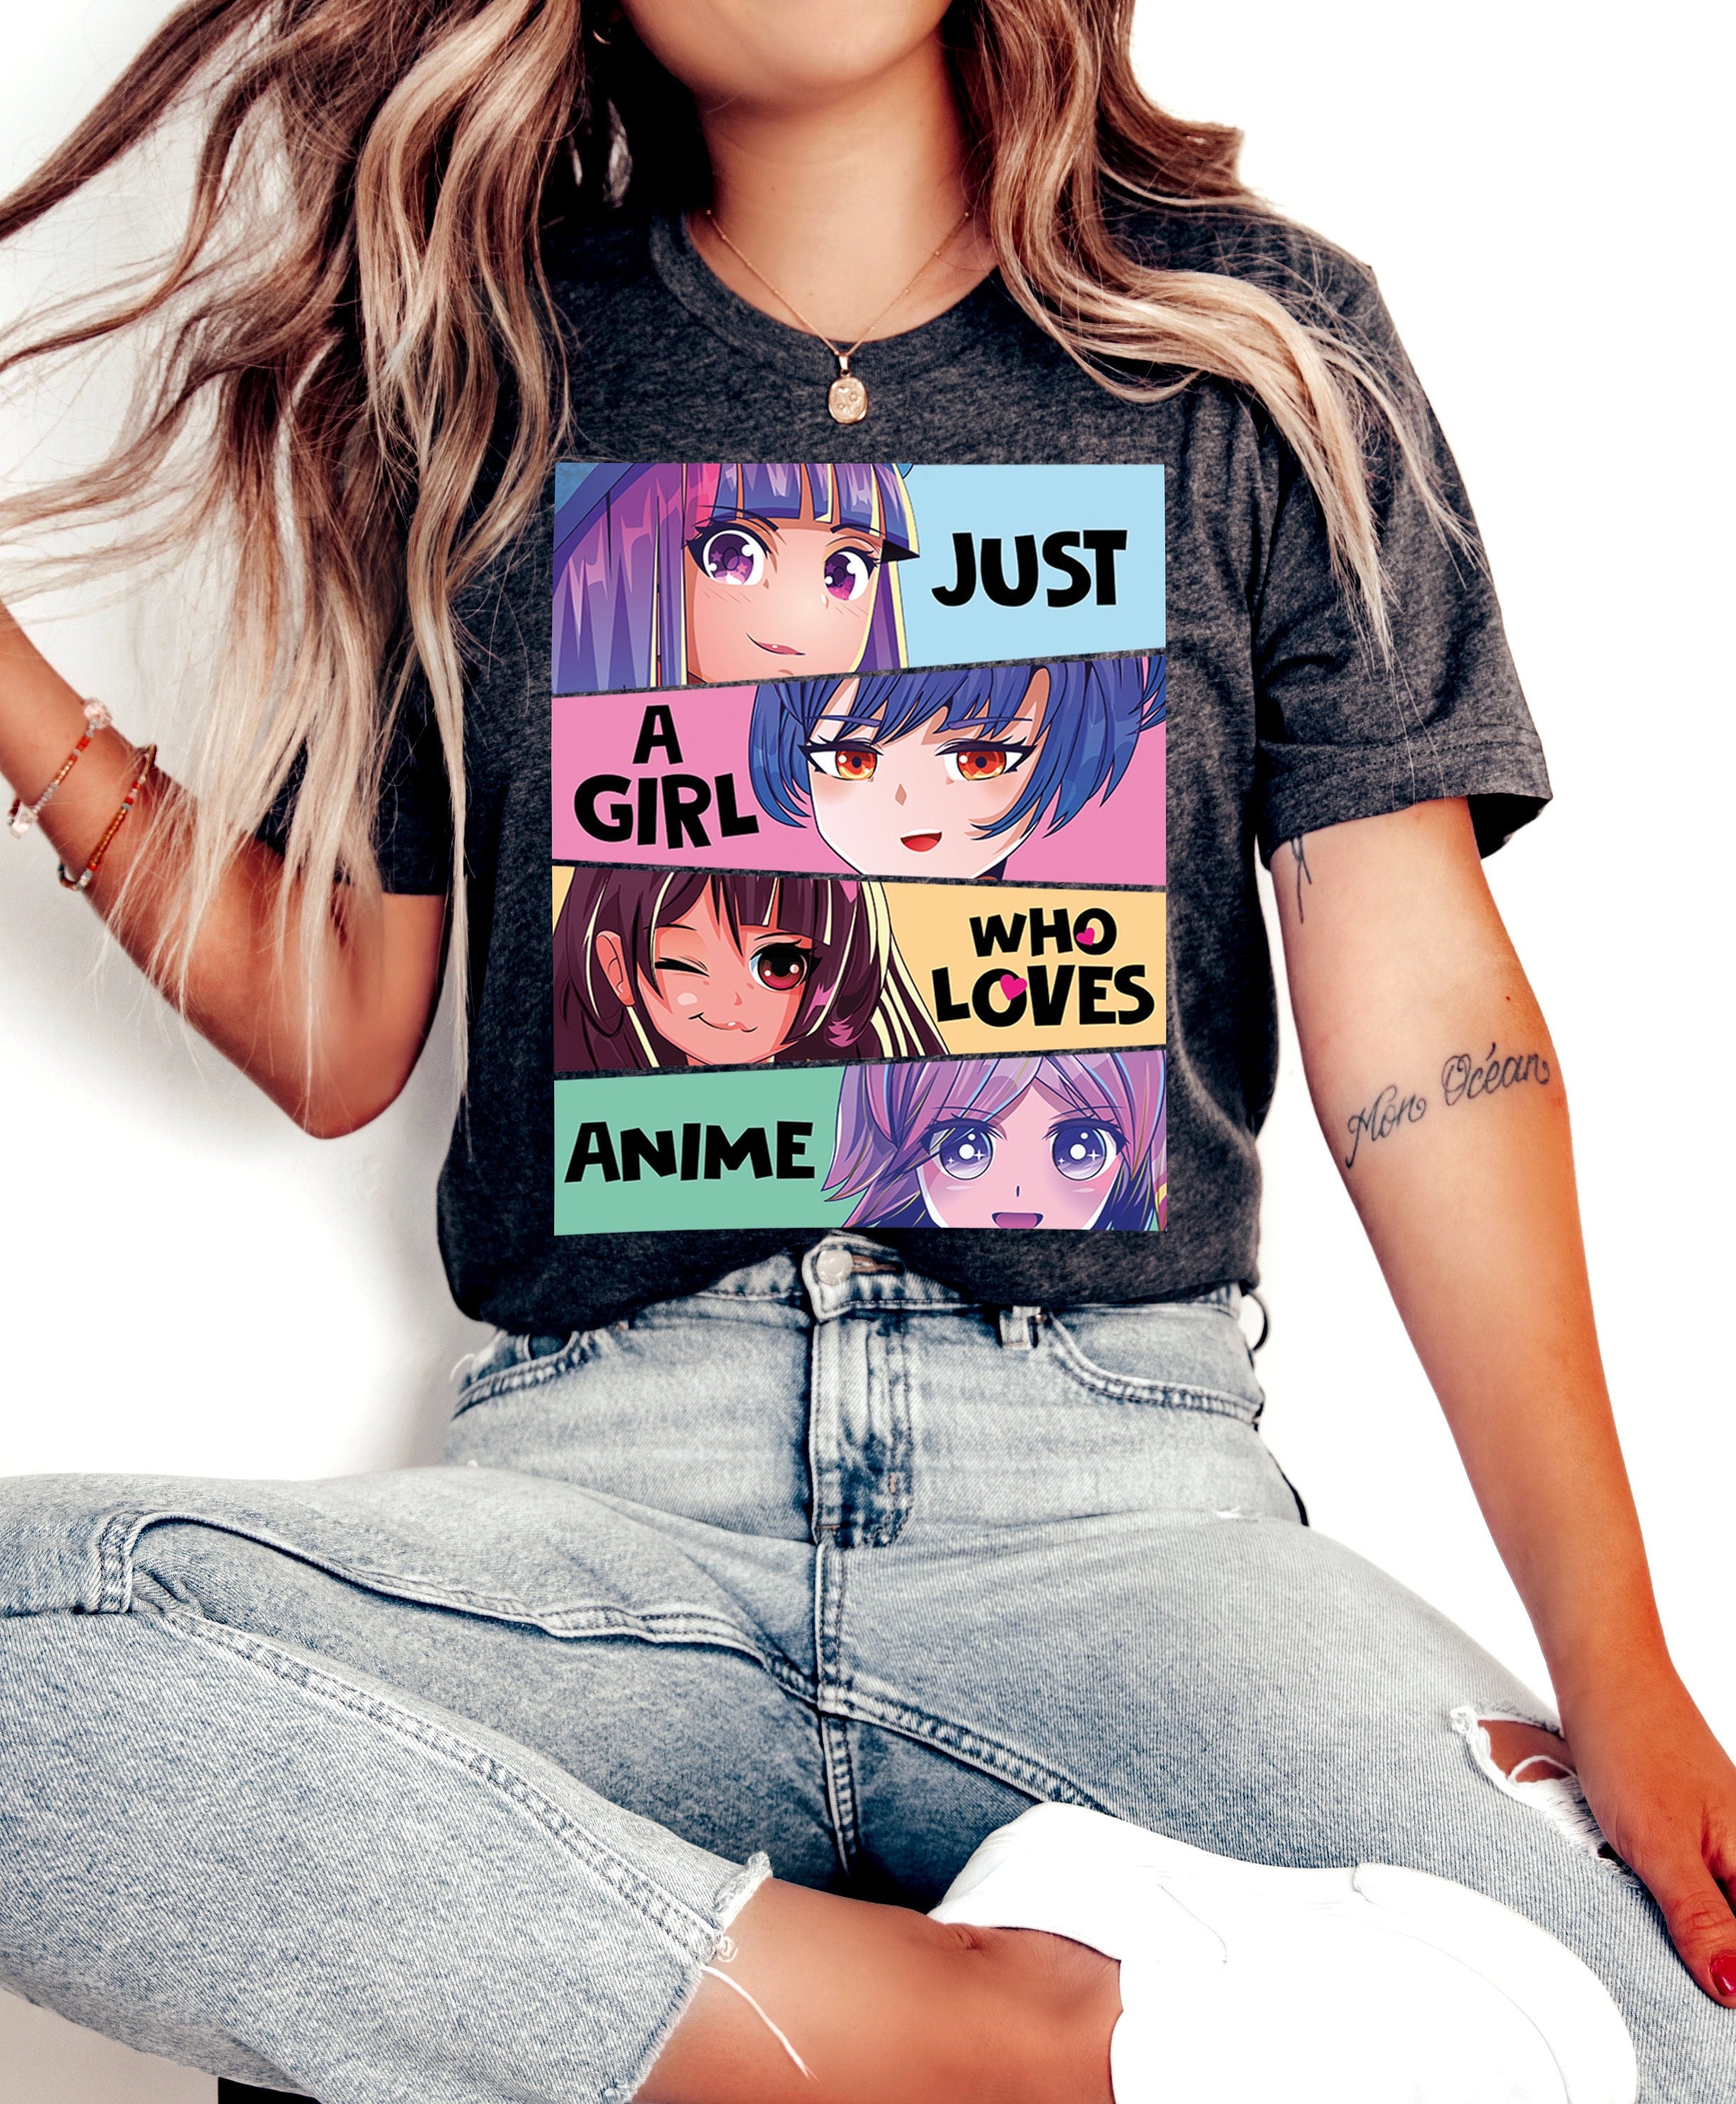 Just A Girl Who loves Anime shirt, Anime Lover Tshirt, Gift For Anime Lover, Cool Anime T-shirt, Anime Clothing, Anime Tshirt 1190105134